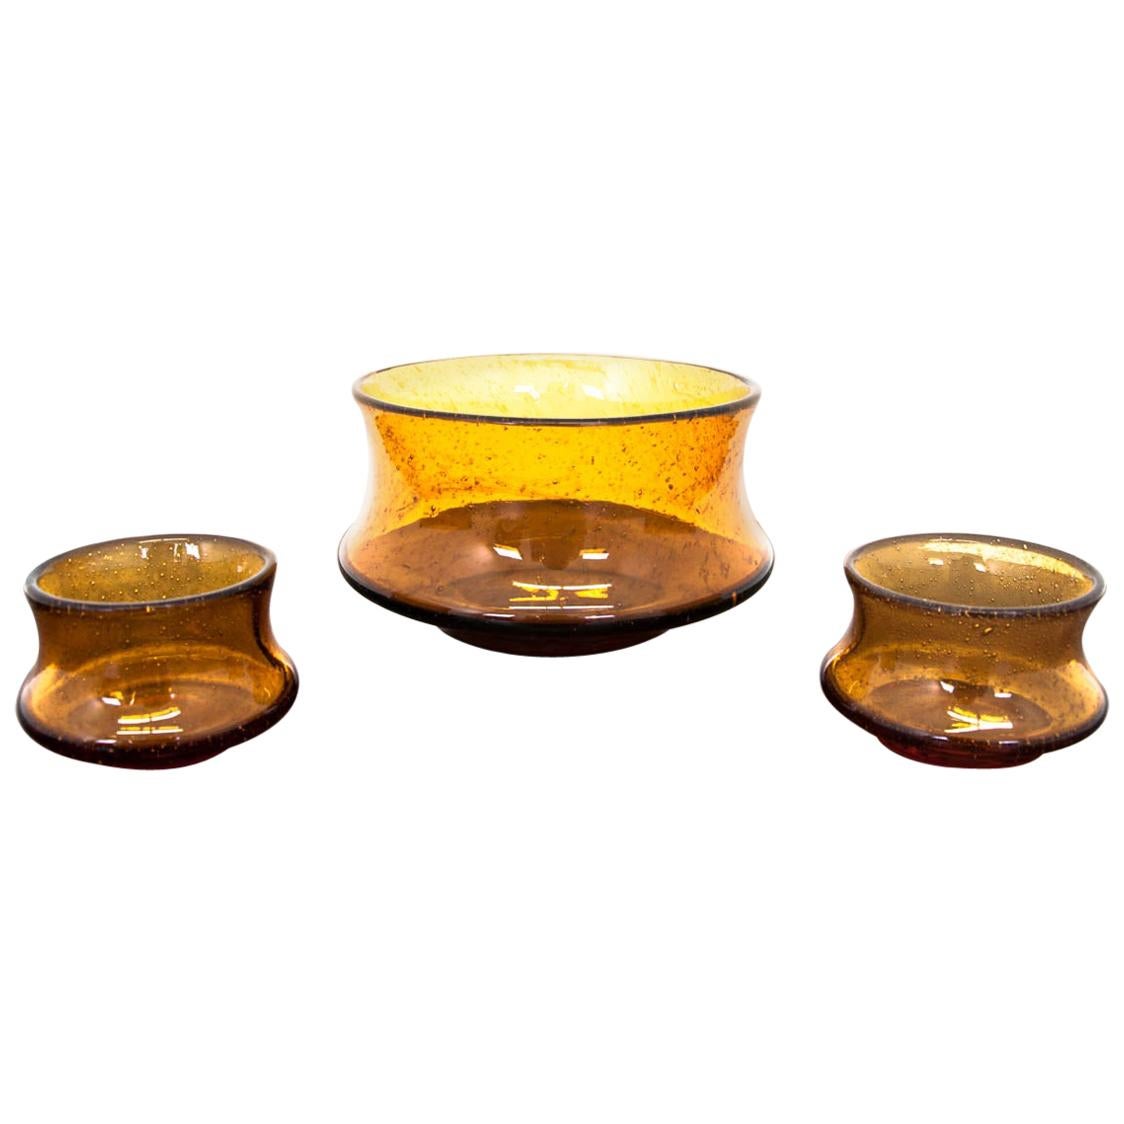 Three Amber Color Glass Bowls